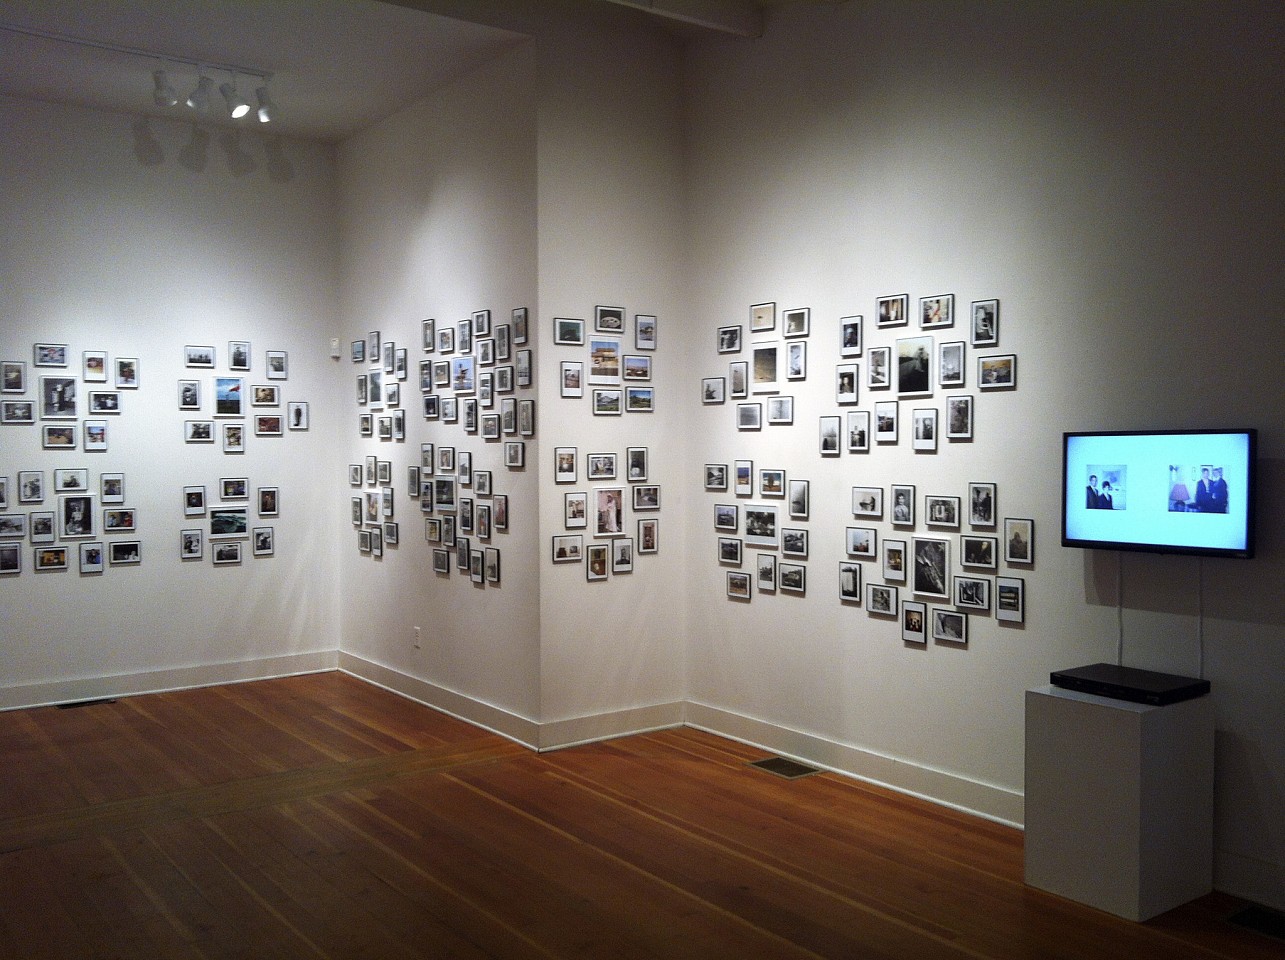 Oliver Wasow, Byrdcliffe Guild Woodstock, New York (installation view)
Found photographs